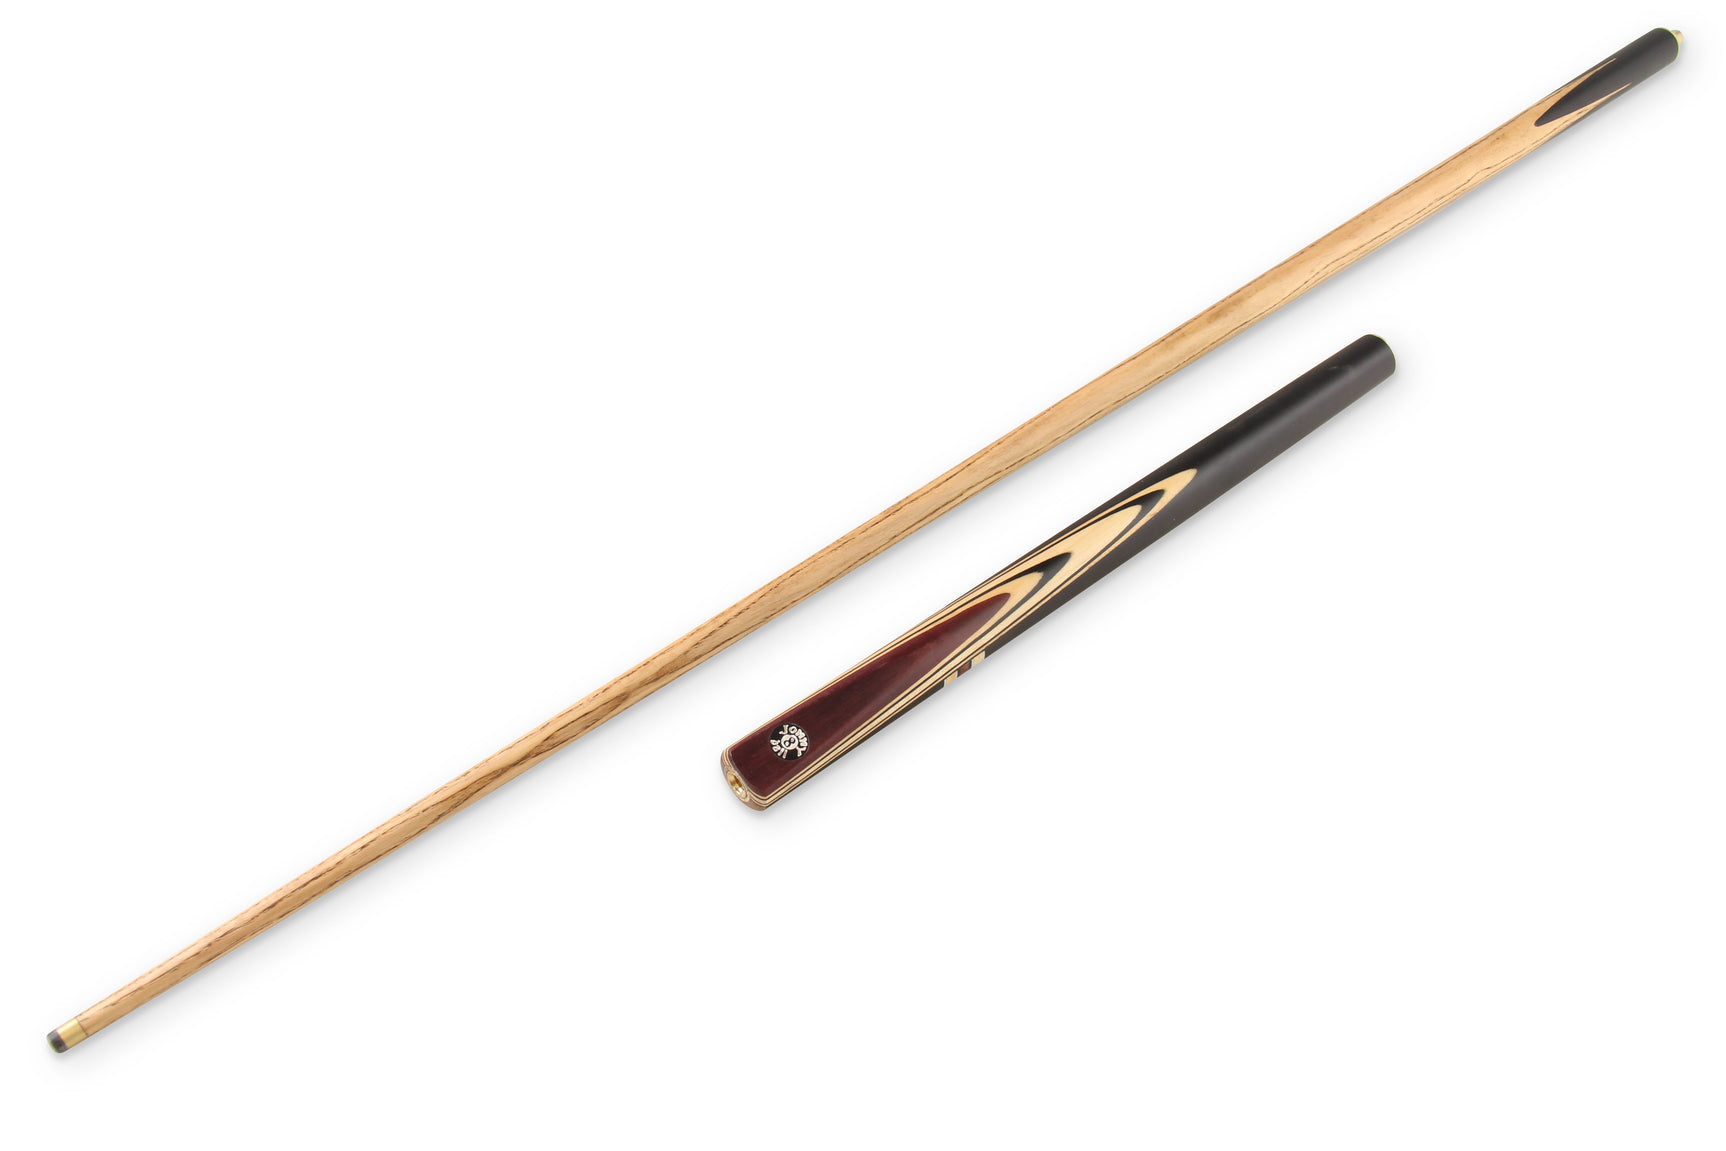 Jonny 8 Ball 57 Inch Traditional ¾ Jointed Ash Snooker Pool Cue 9mm tip + Mini Butt